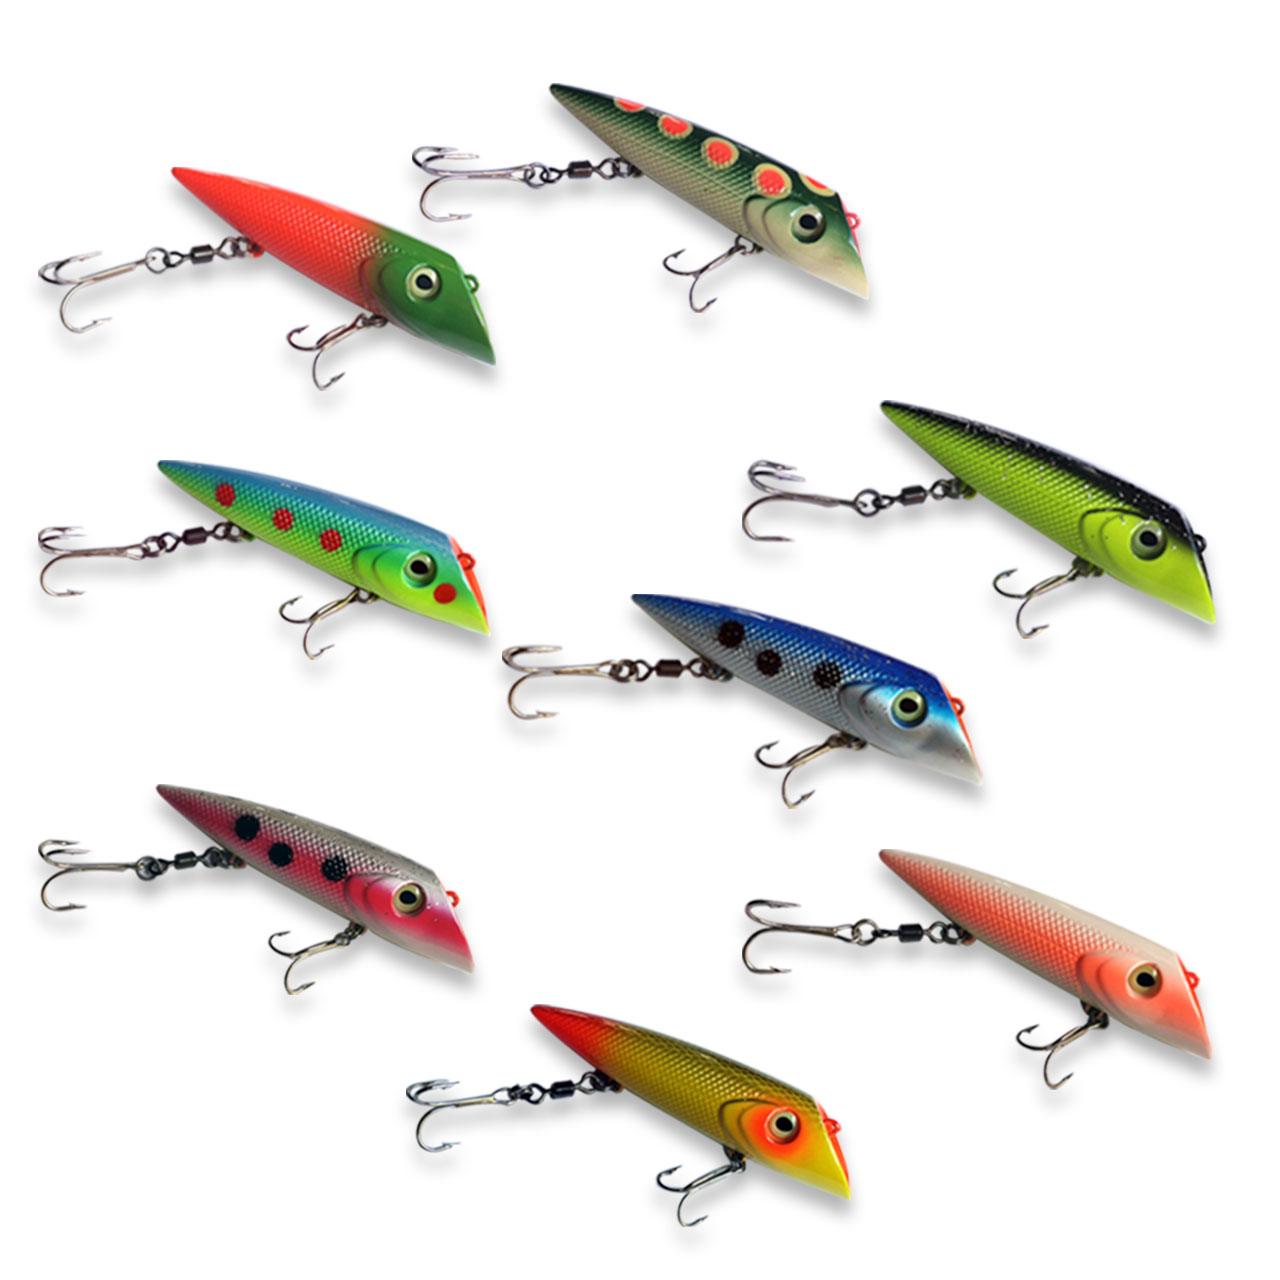 2” Lyman Lures - Size #2 - COMING SOON! - NEW 2021 Colours! - Hook